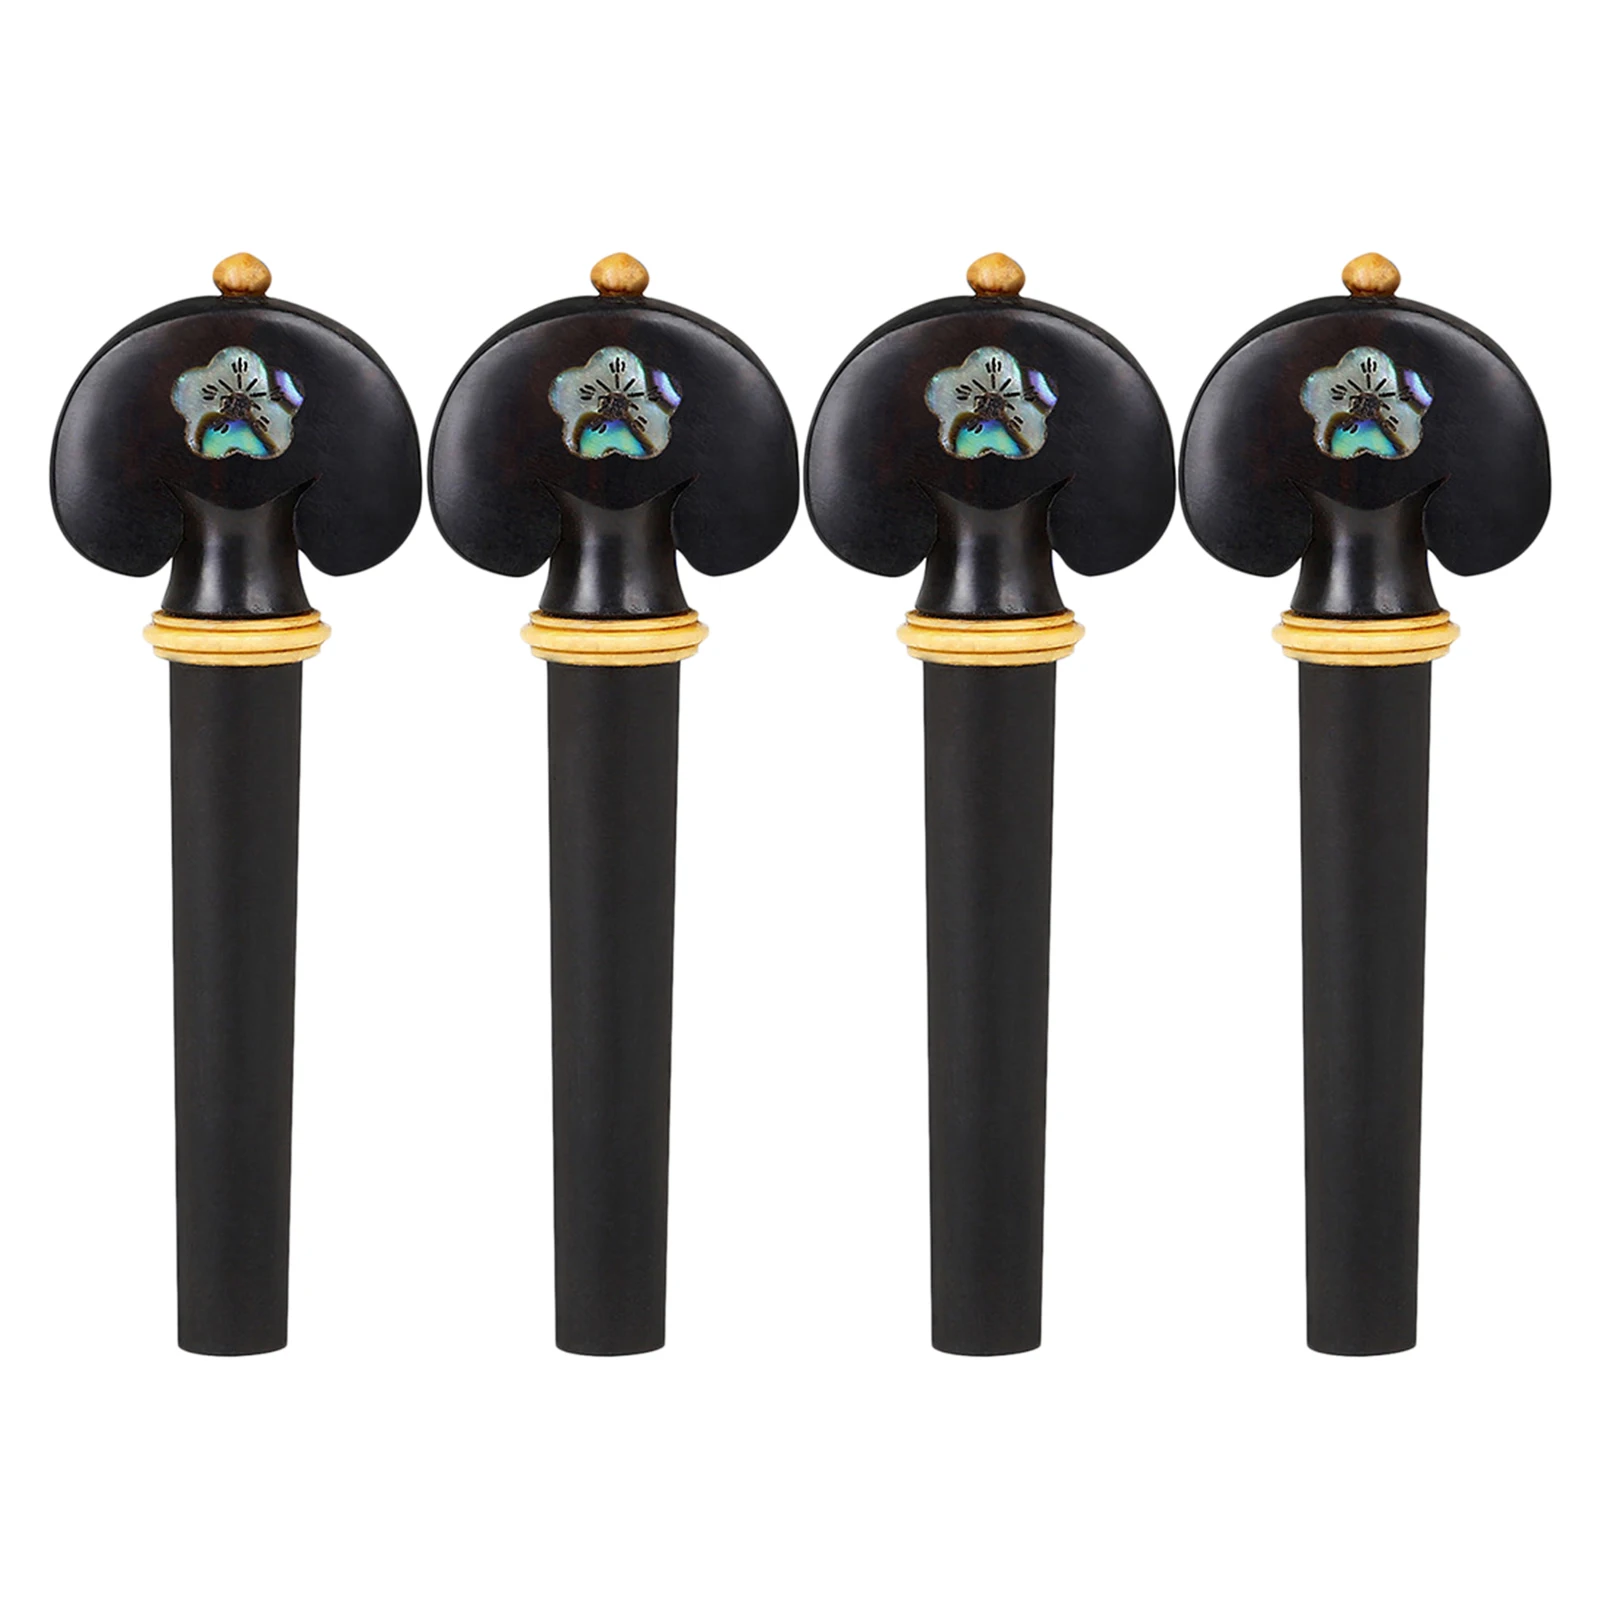 4x Ebony 3/4 4/4 Violin Tuning Pegs Wooden String Instrument Accessories Ukulele Classical Acoustic Guitar Tuning Pegs